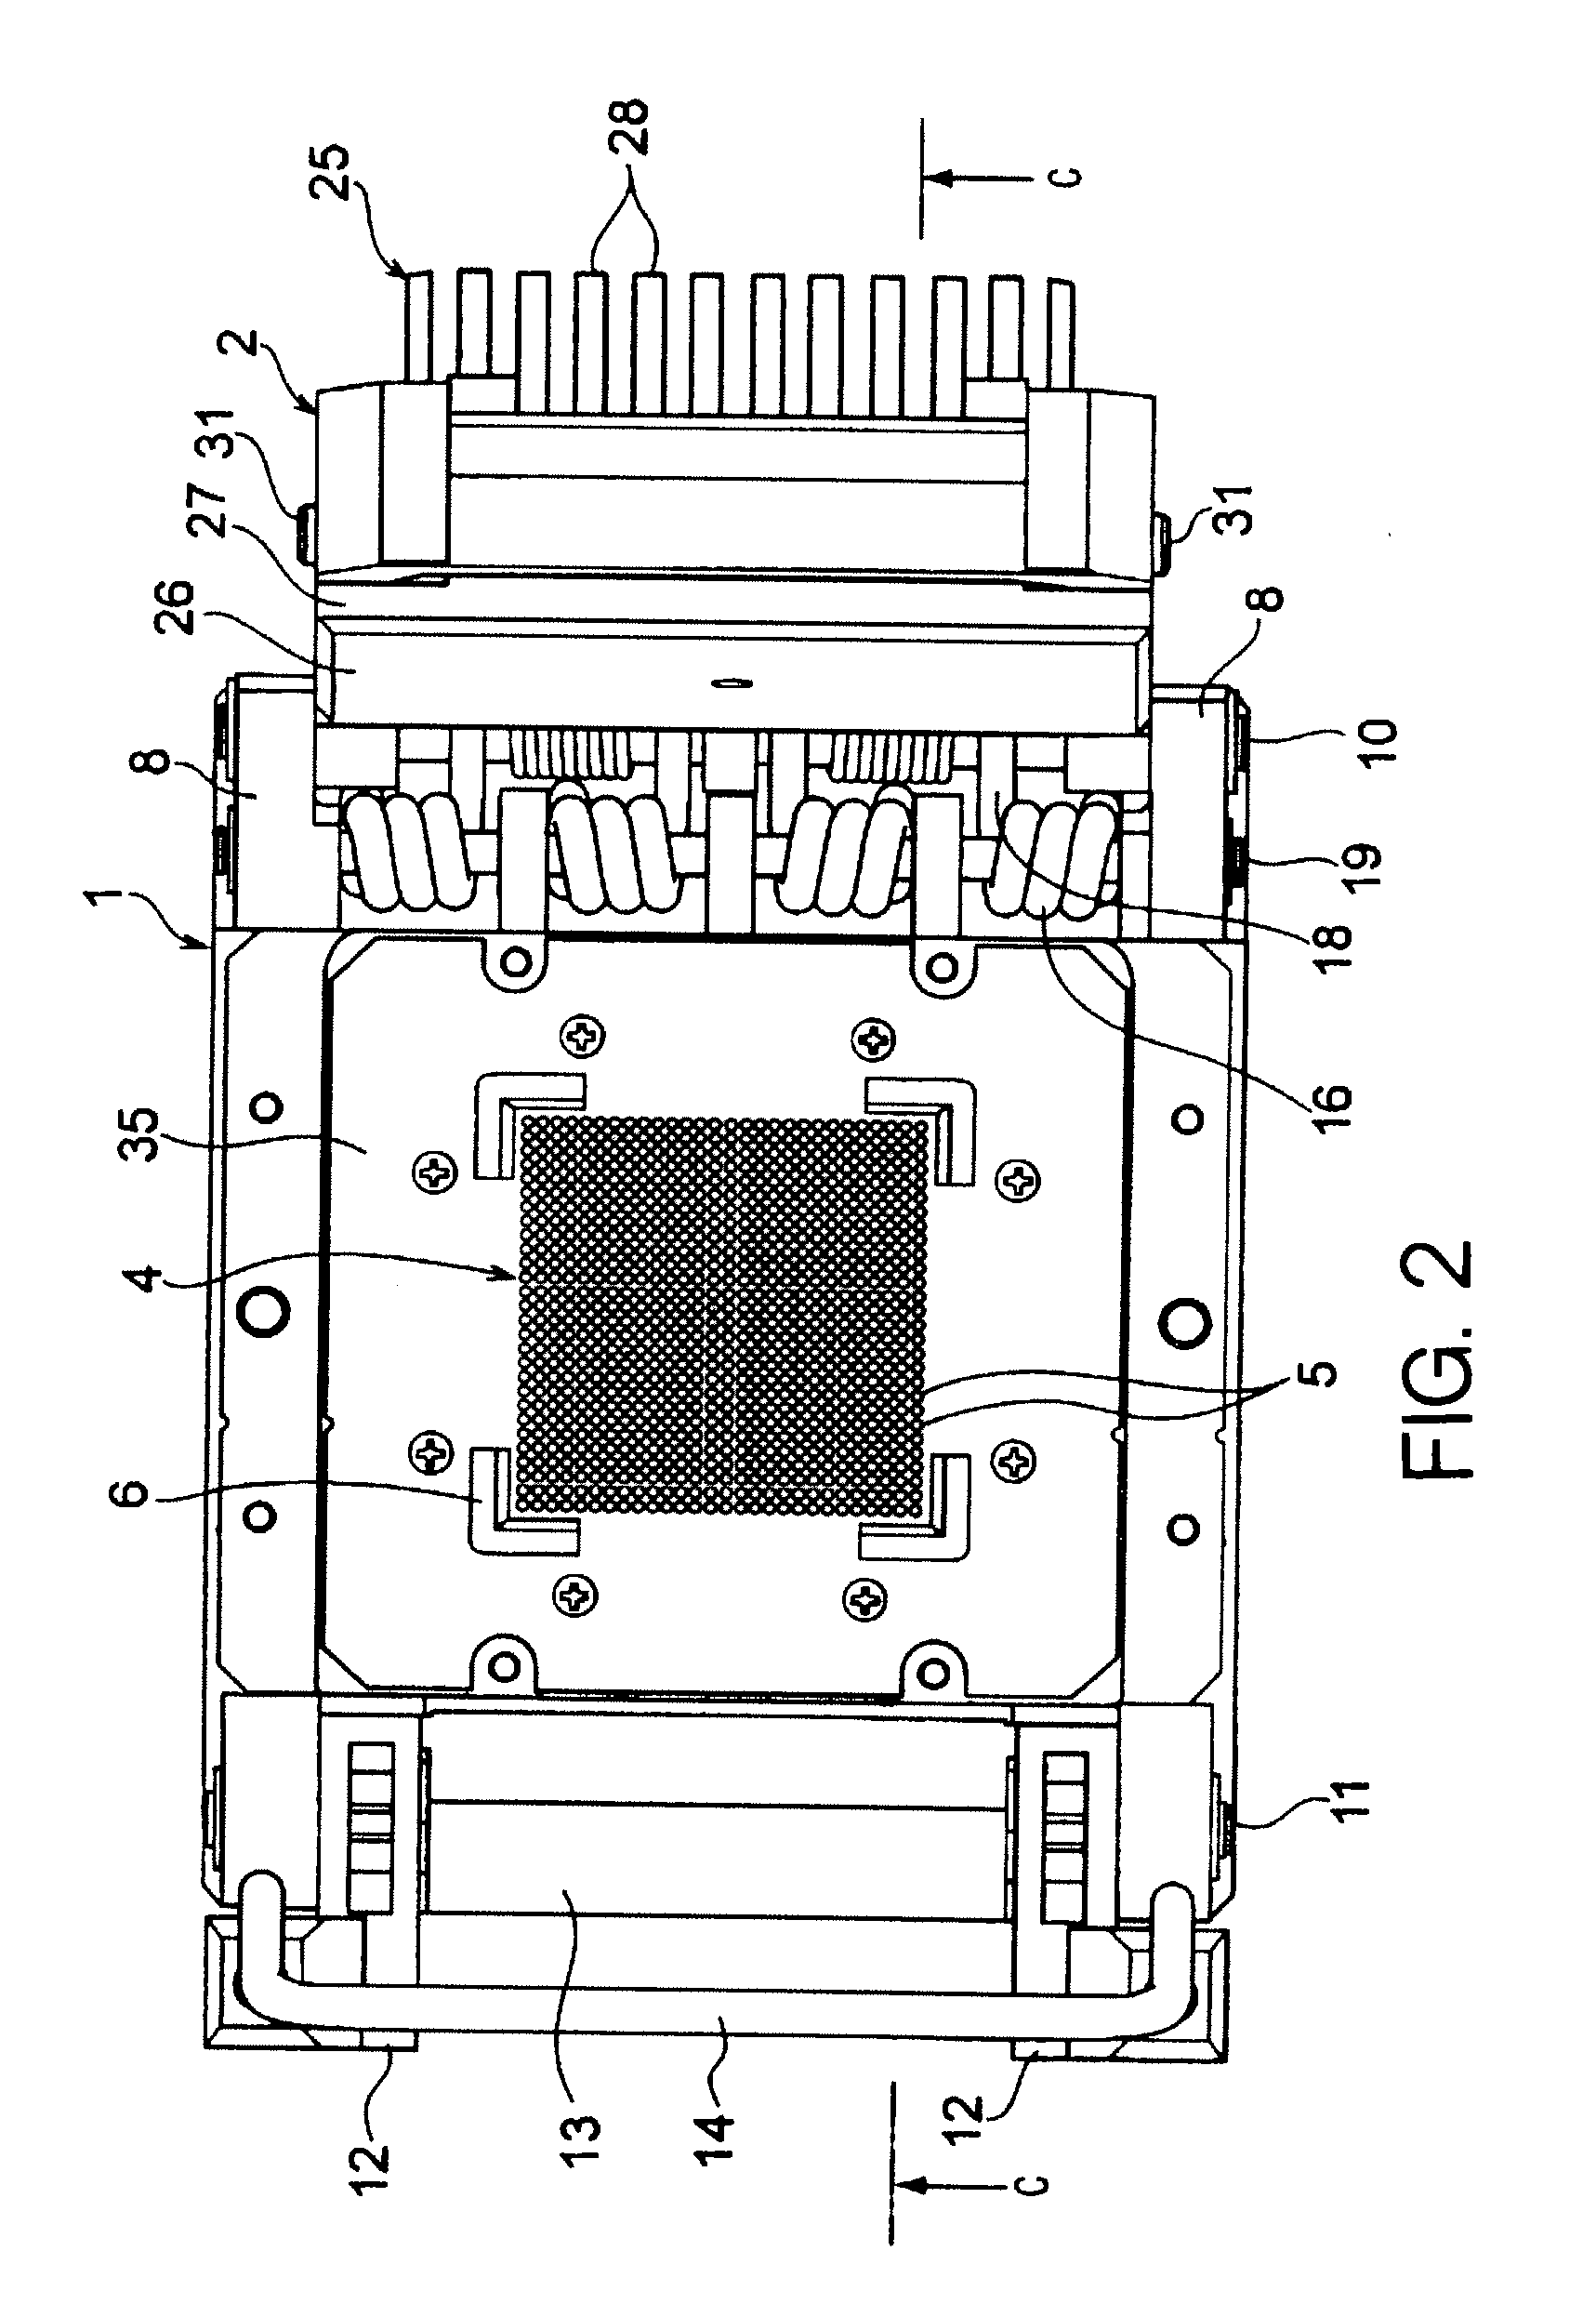 Electrical component socket